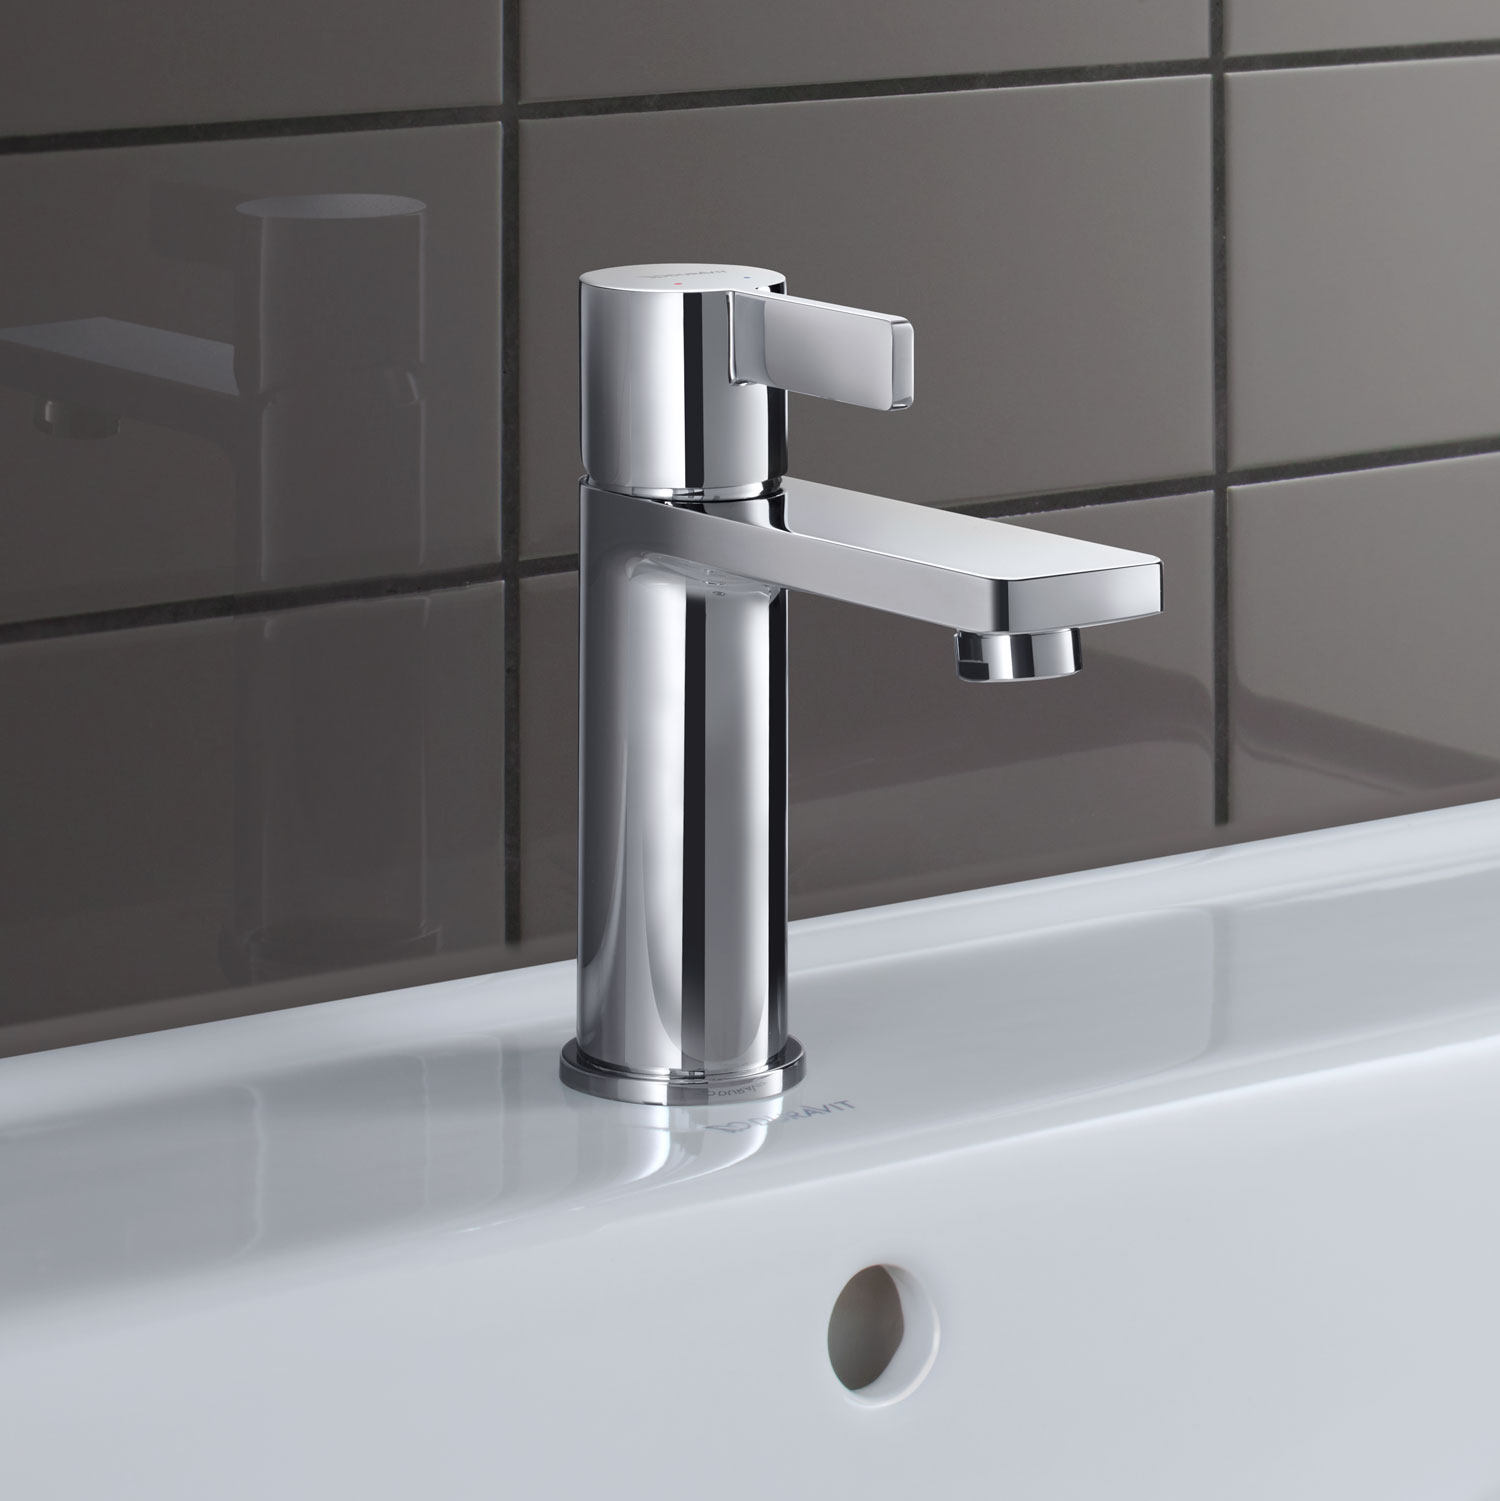 D-Neo faucet on washbasin
